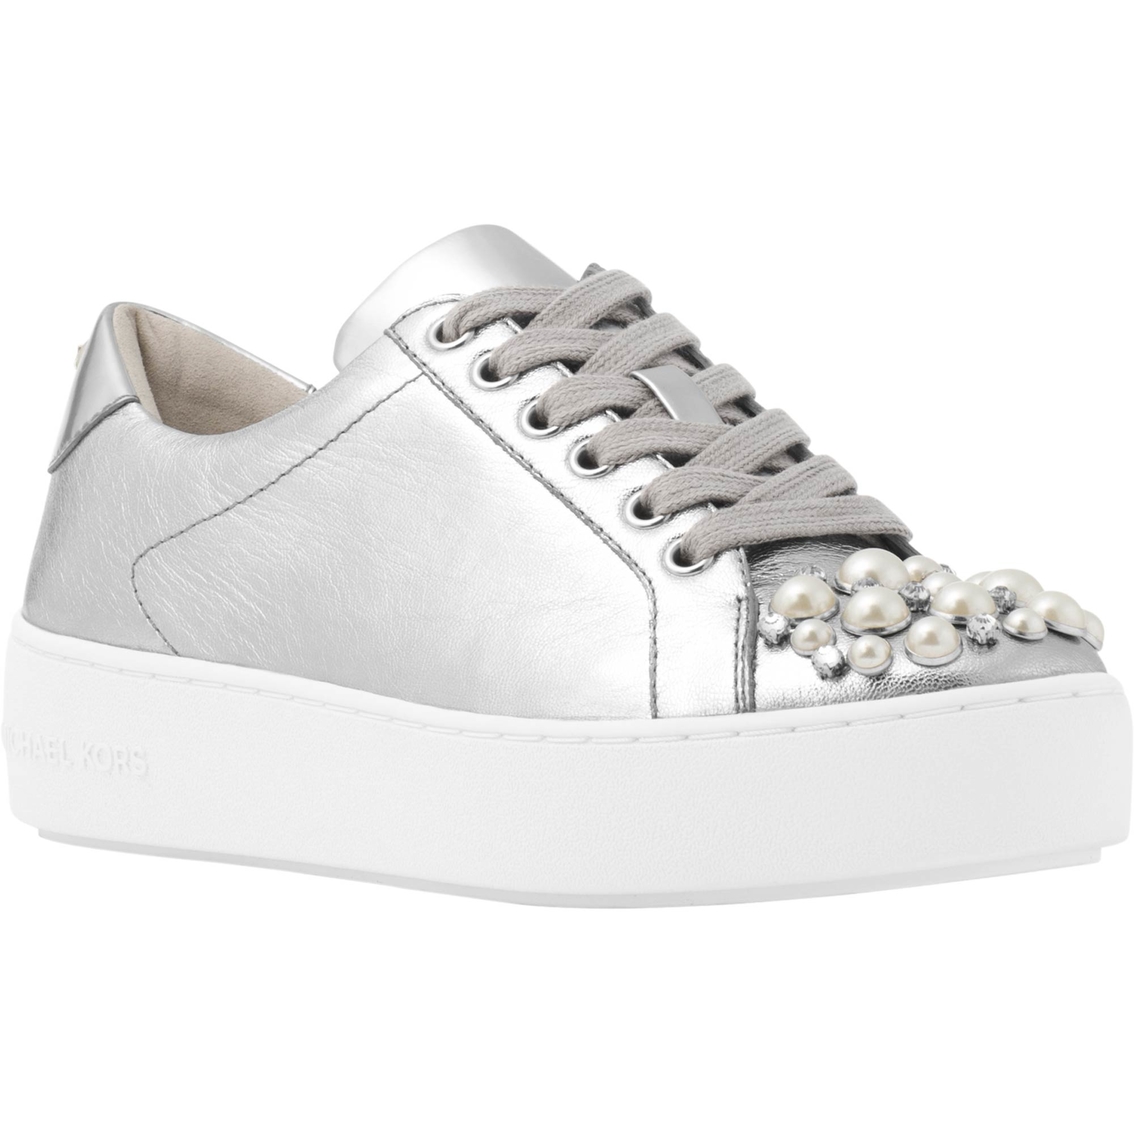 michael kors sneakers poppy lace up